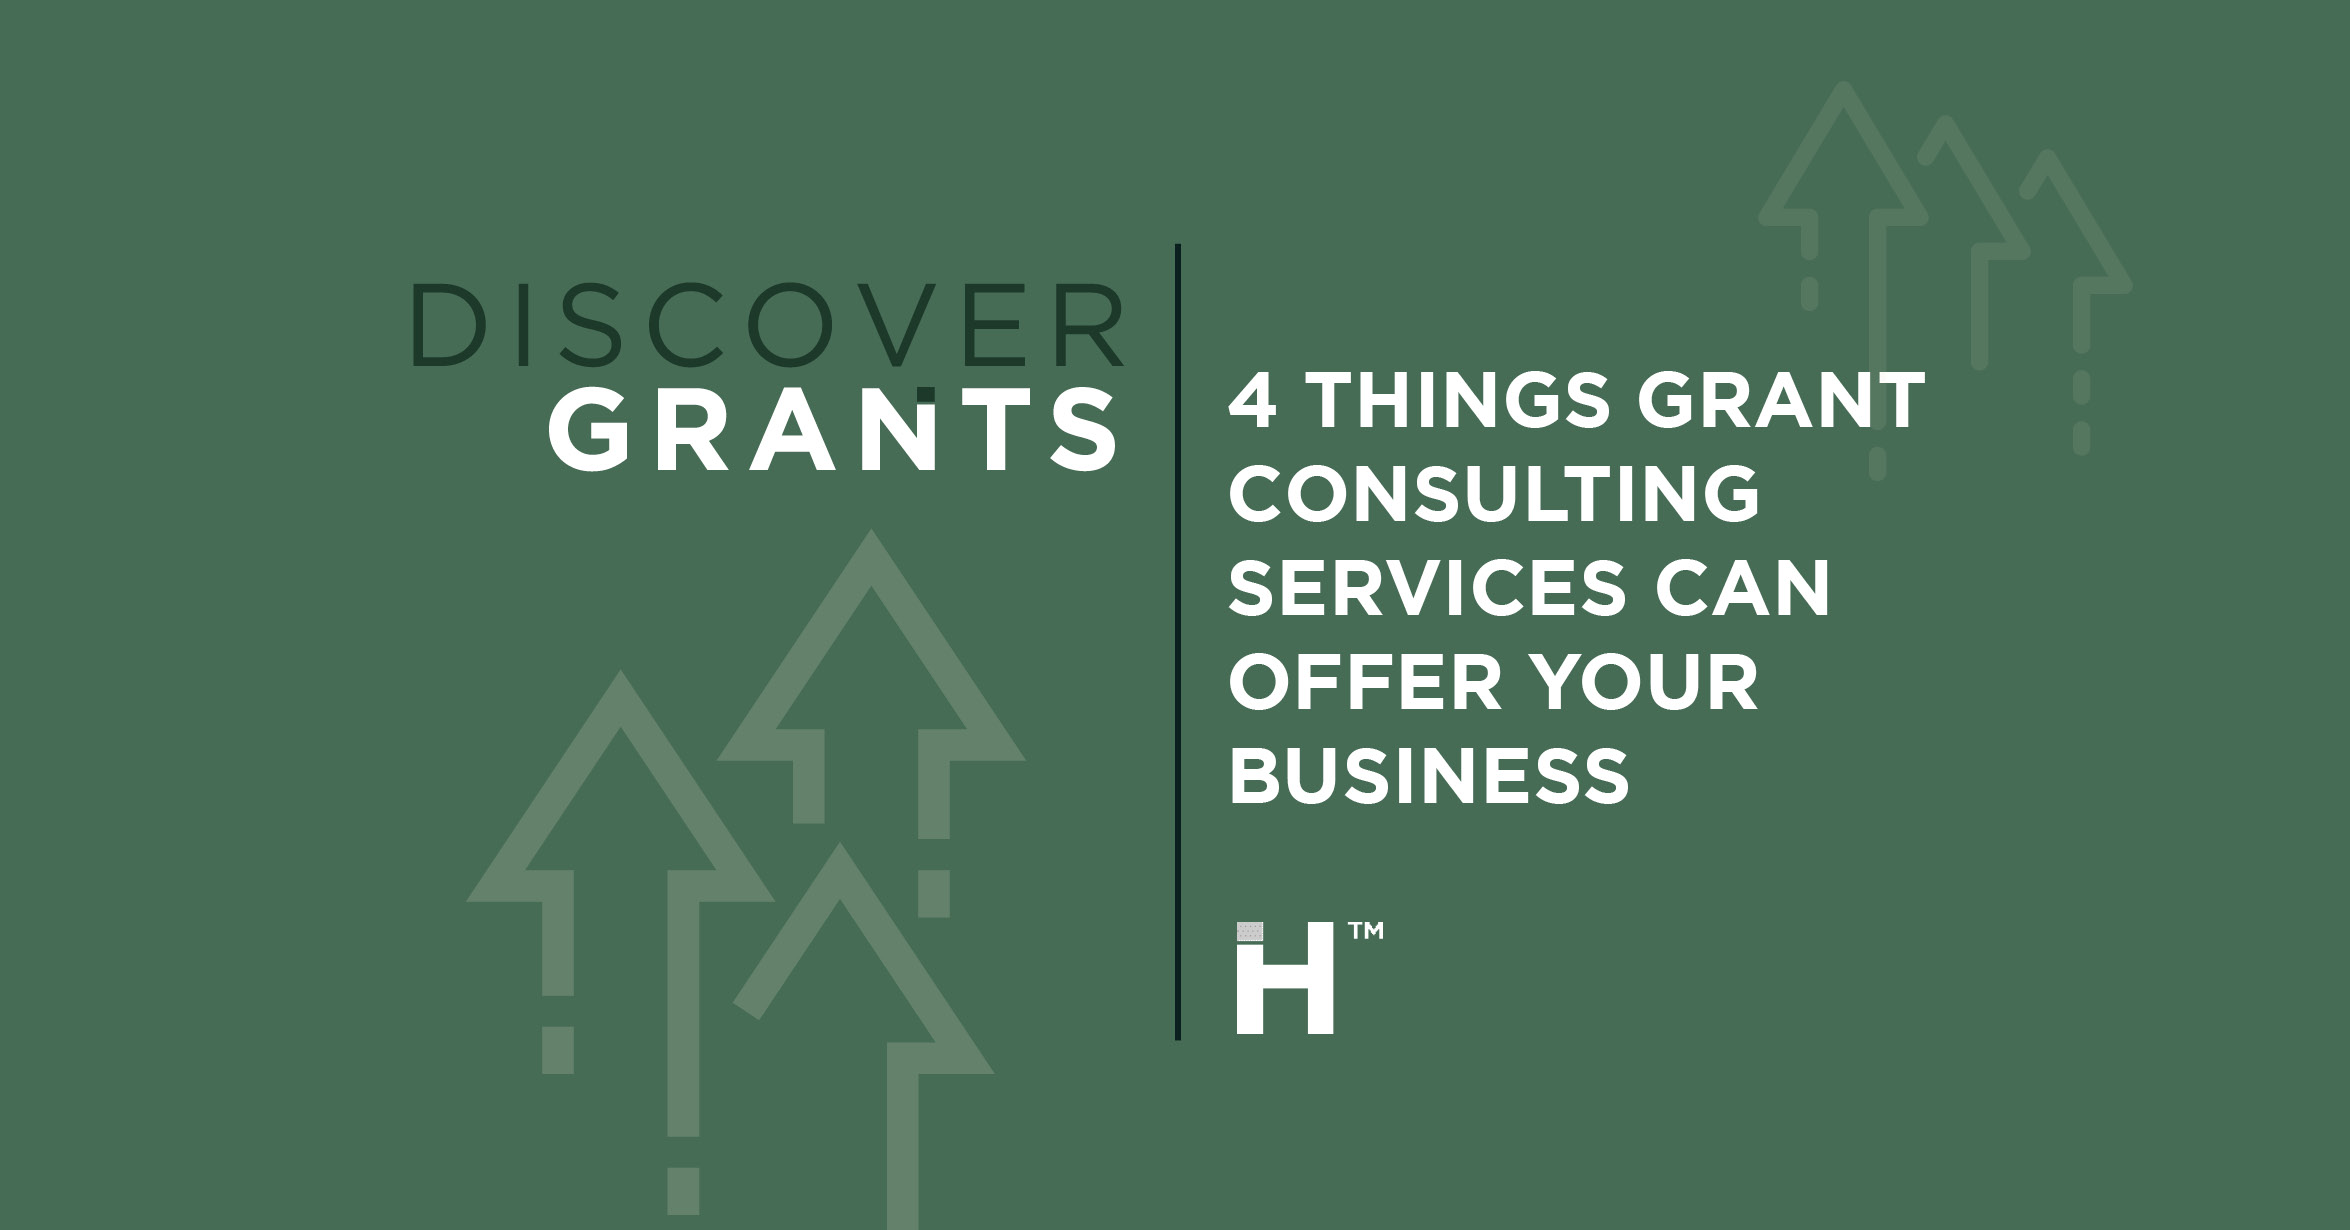 What can grant consulting services offer you?